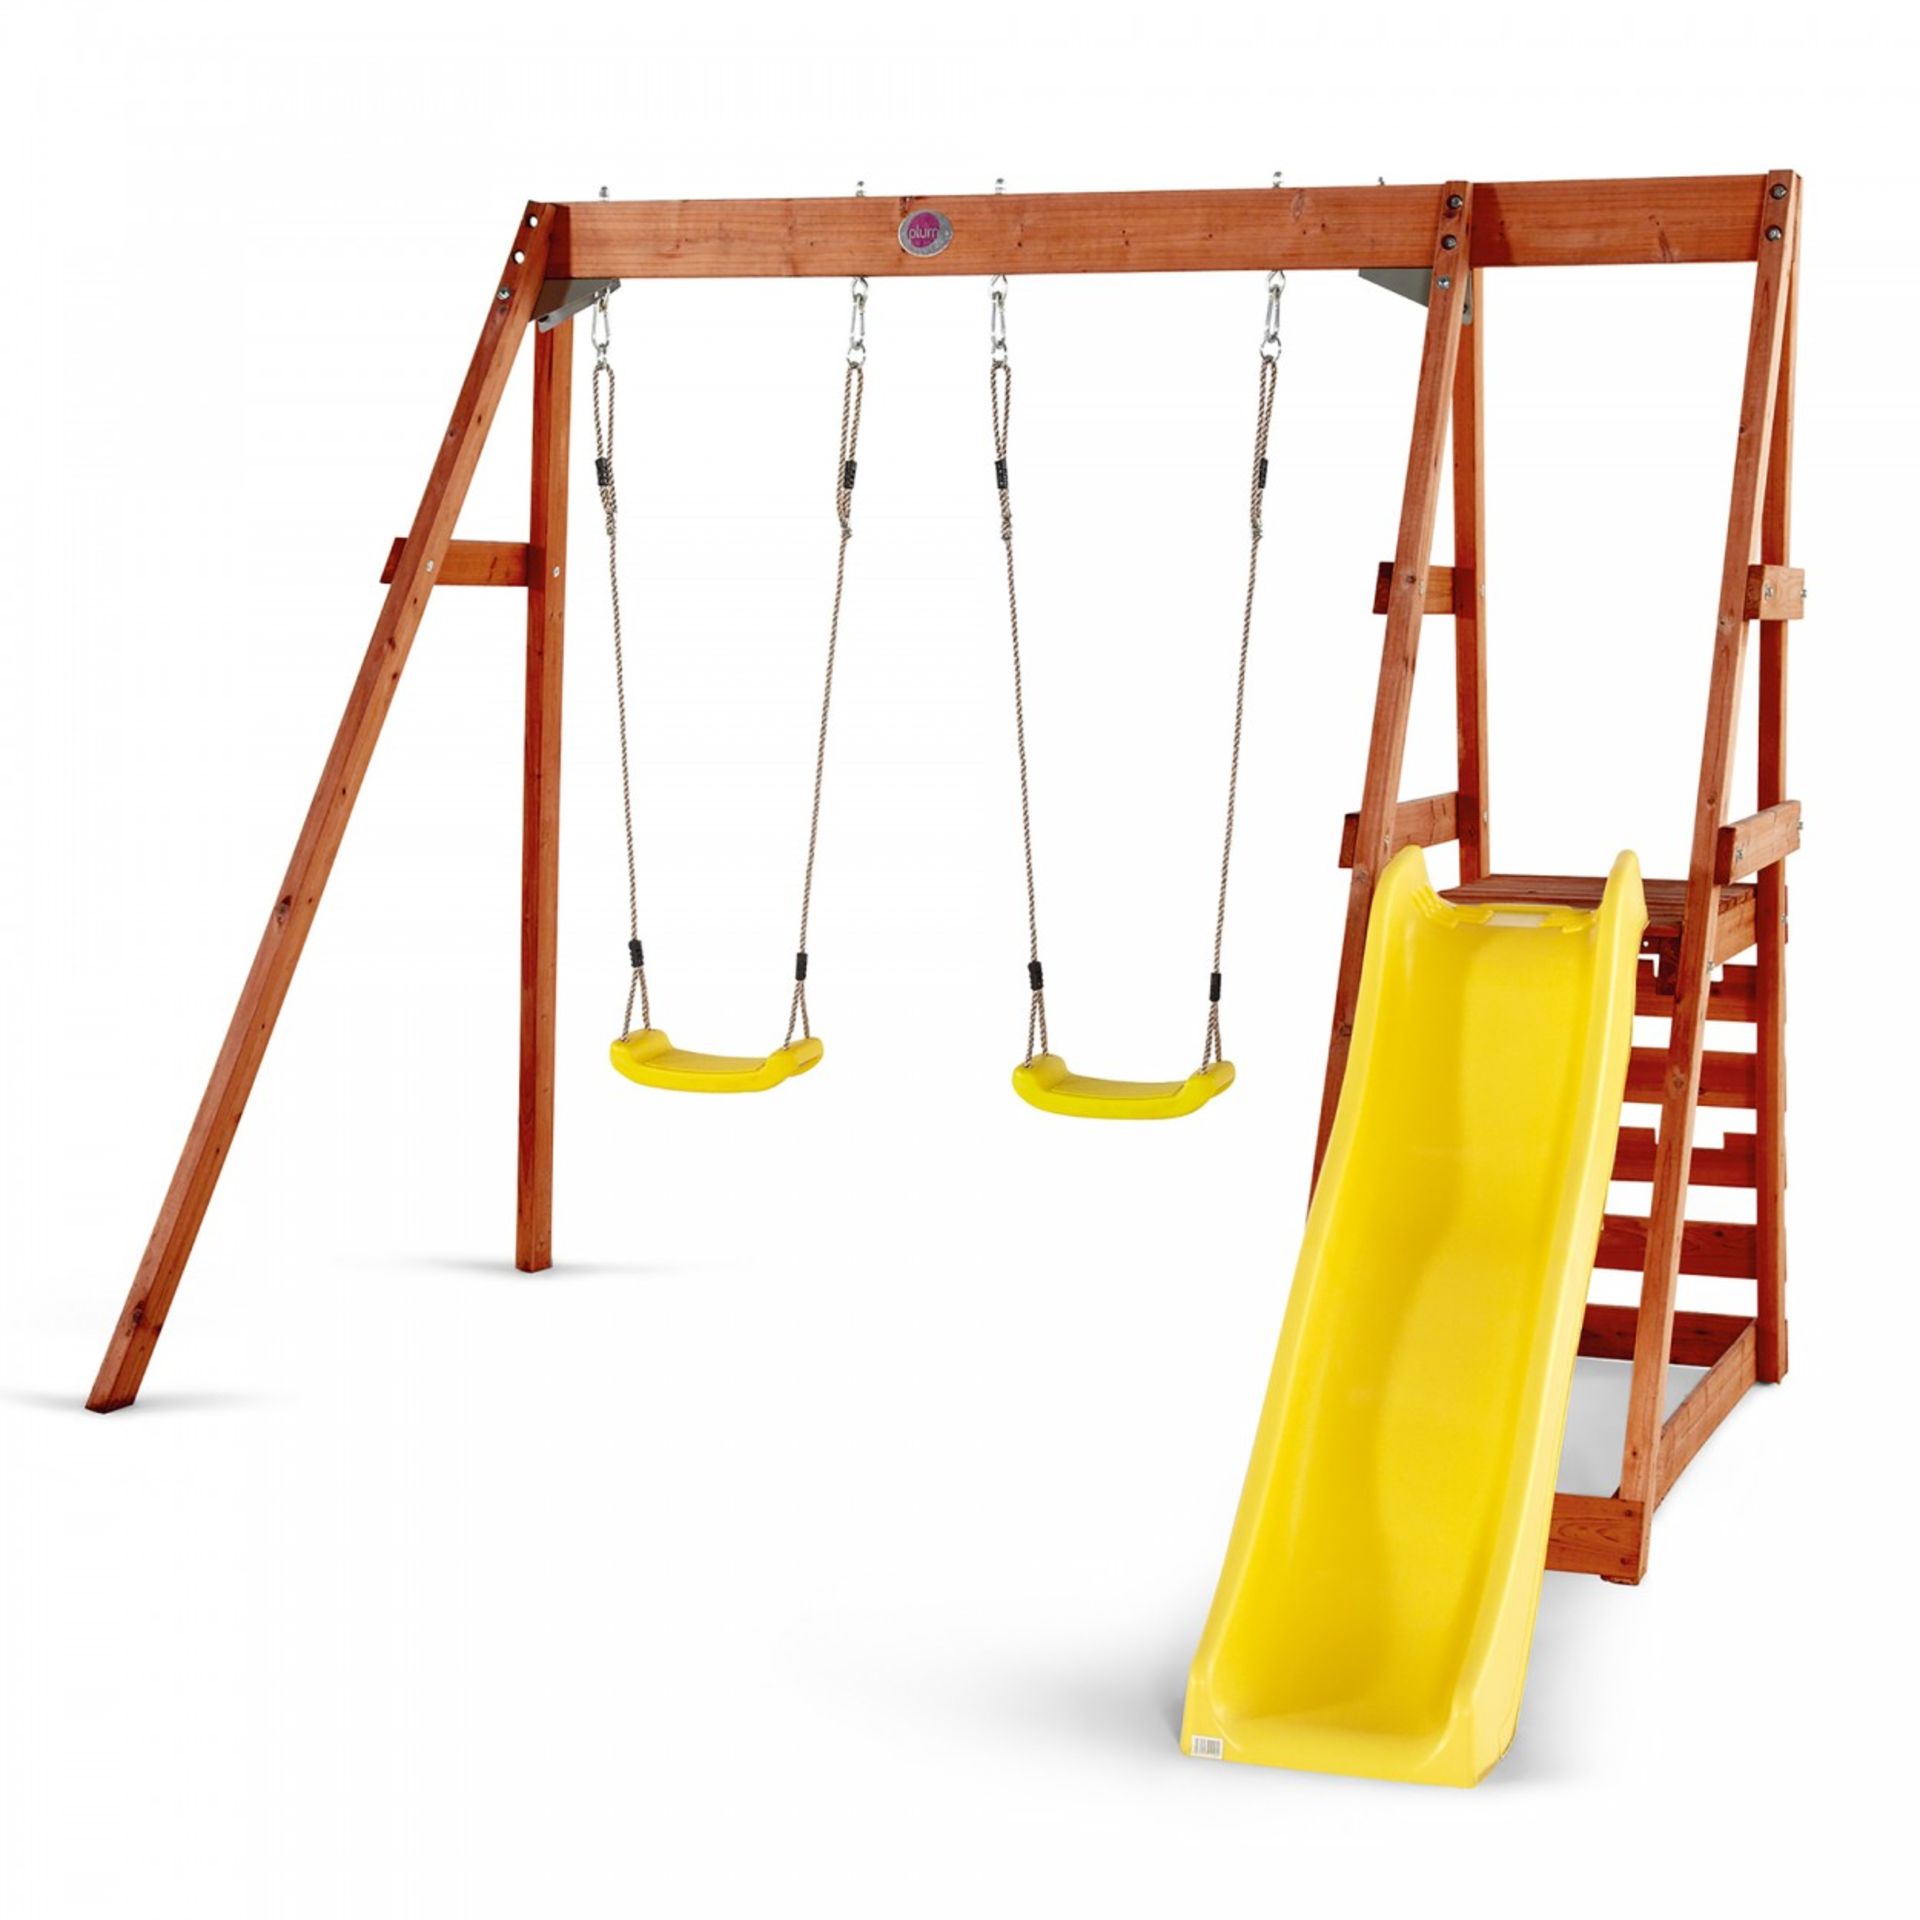 1 x Plum Products Tamarin Wooden Outdoor Play Centre. BRAND NEW. RRP £399.99 each! The Tamarin